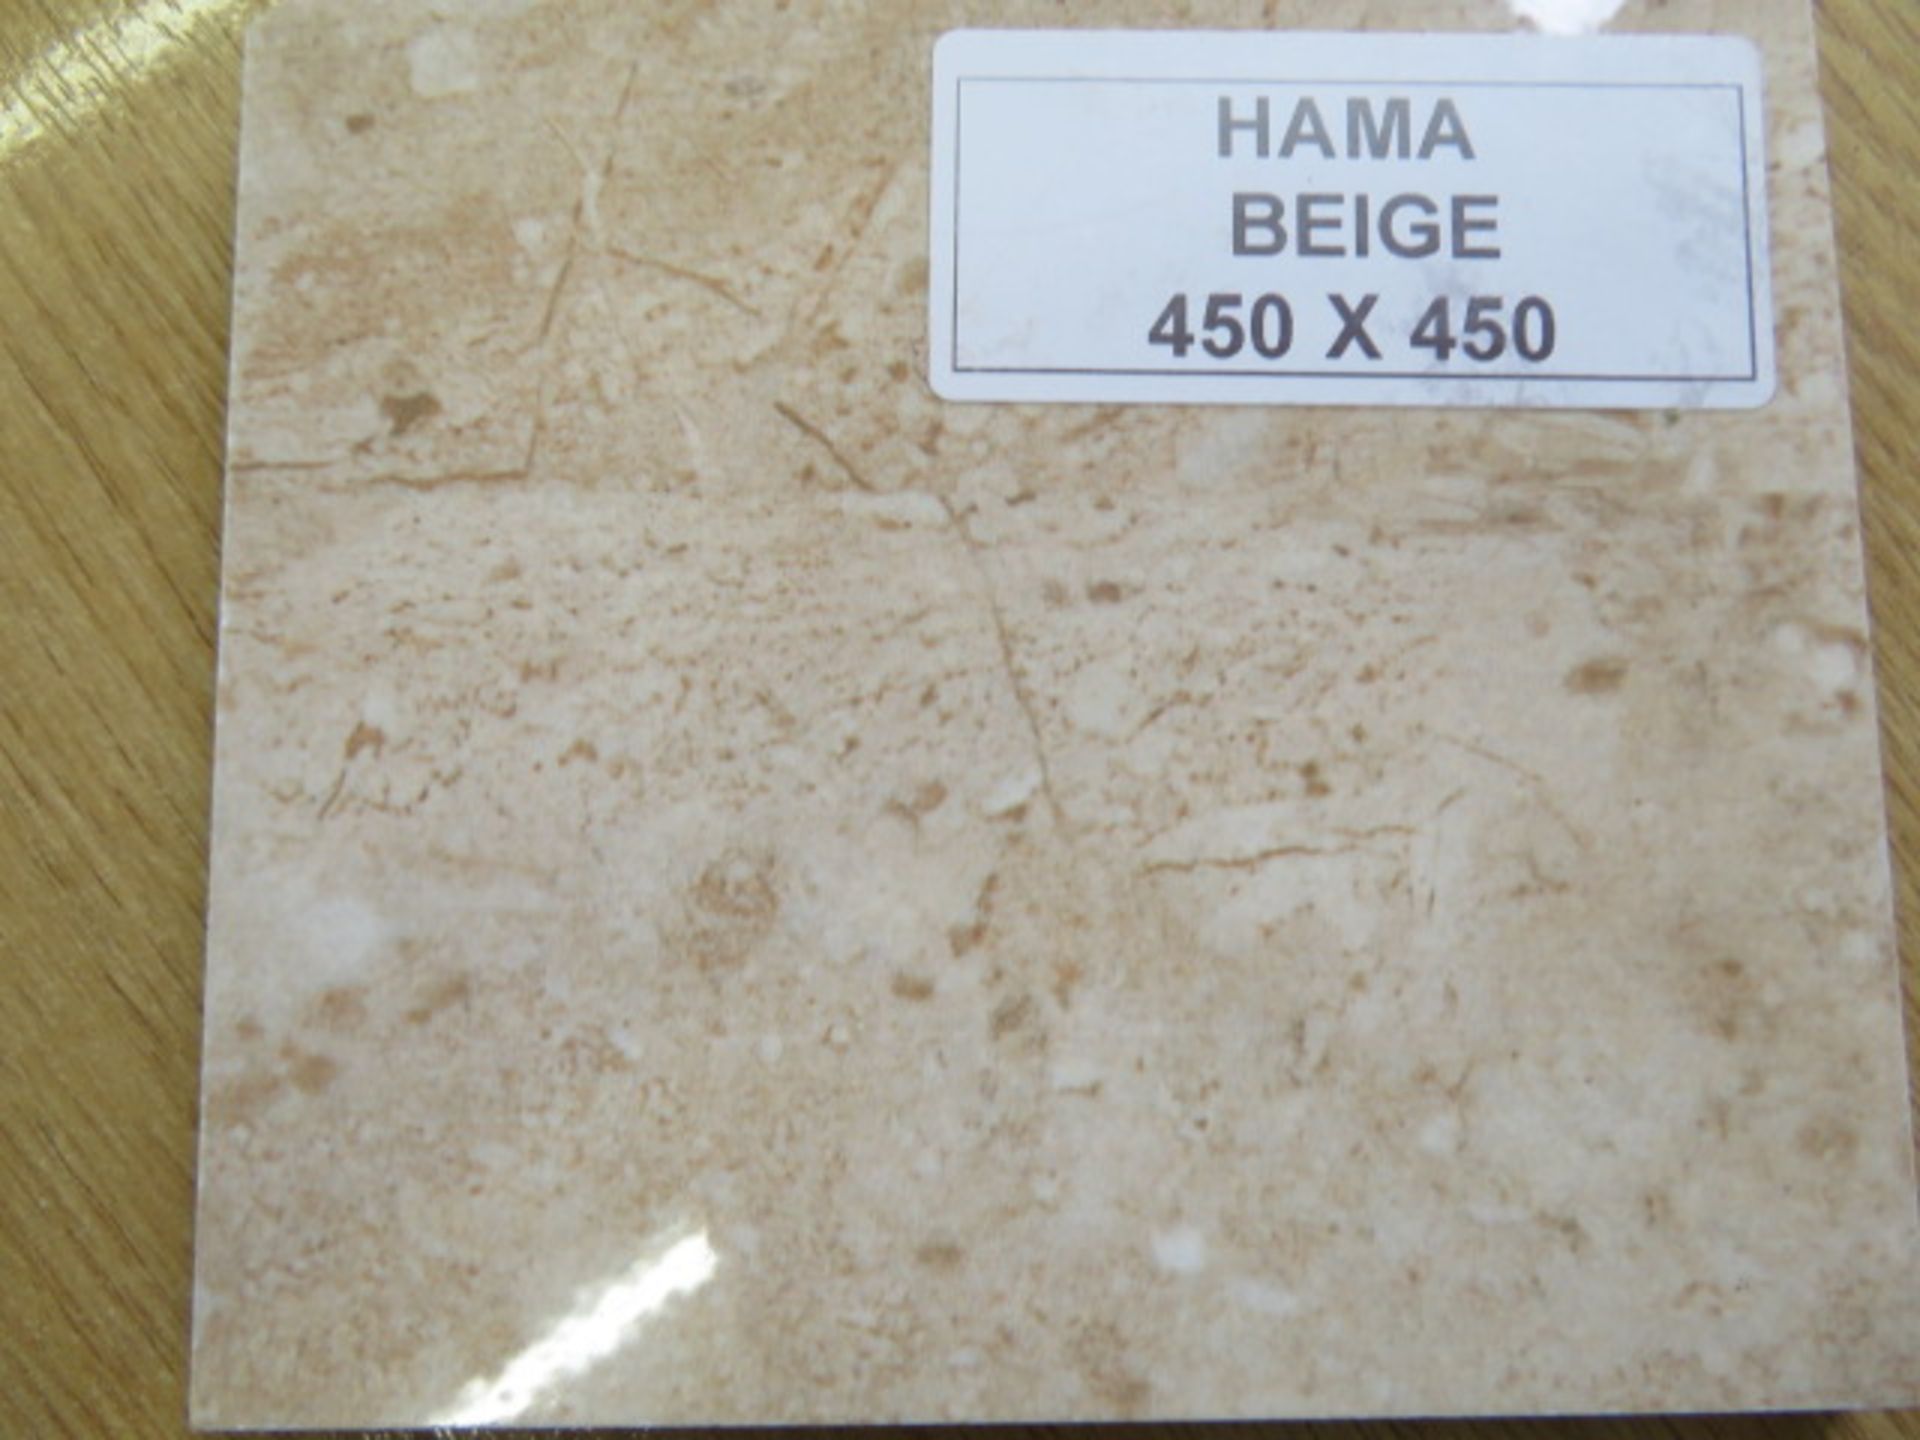 NEW 8.52m2 Hama Beige Wall and Floor Tiles. 450x450mm per tile, 10mm thick. Initially ceramic... - Image 2 of 3